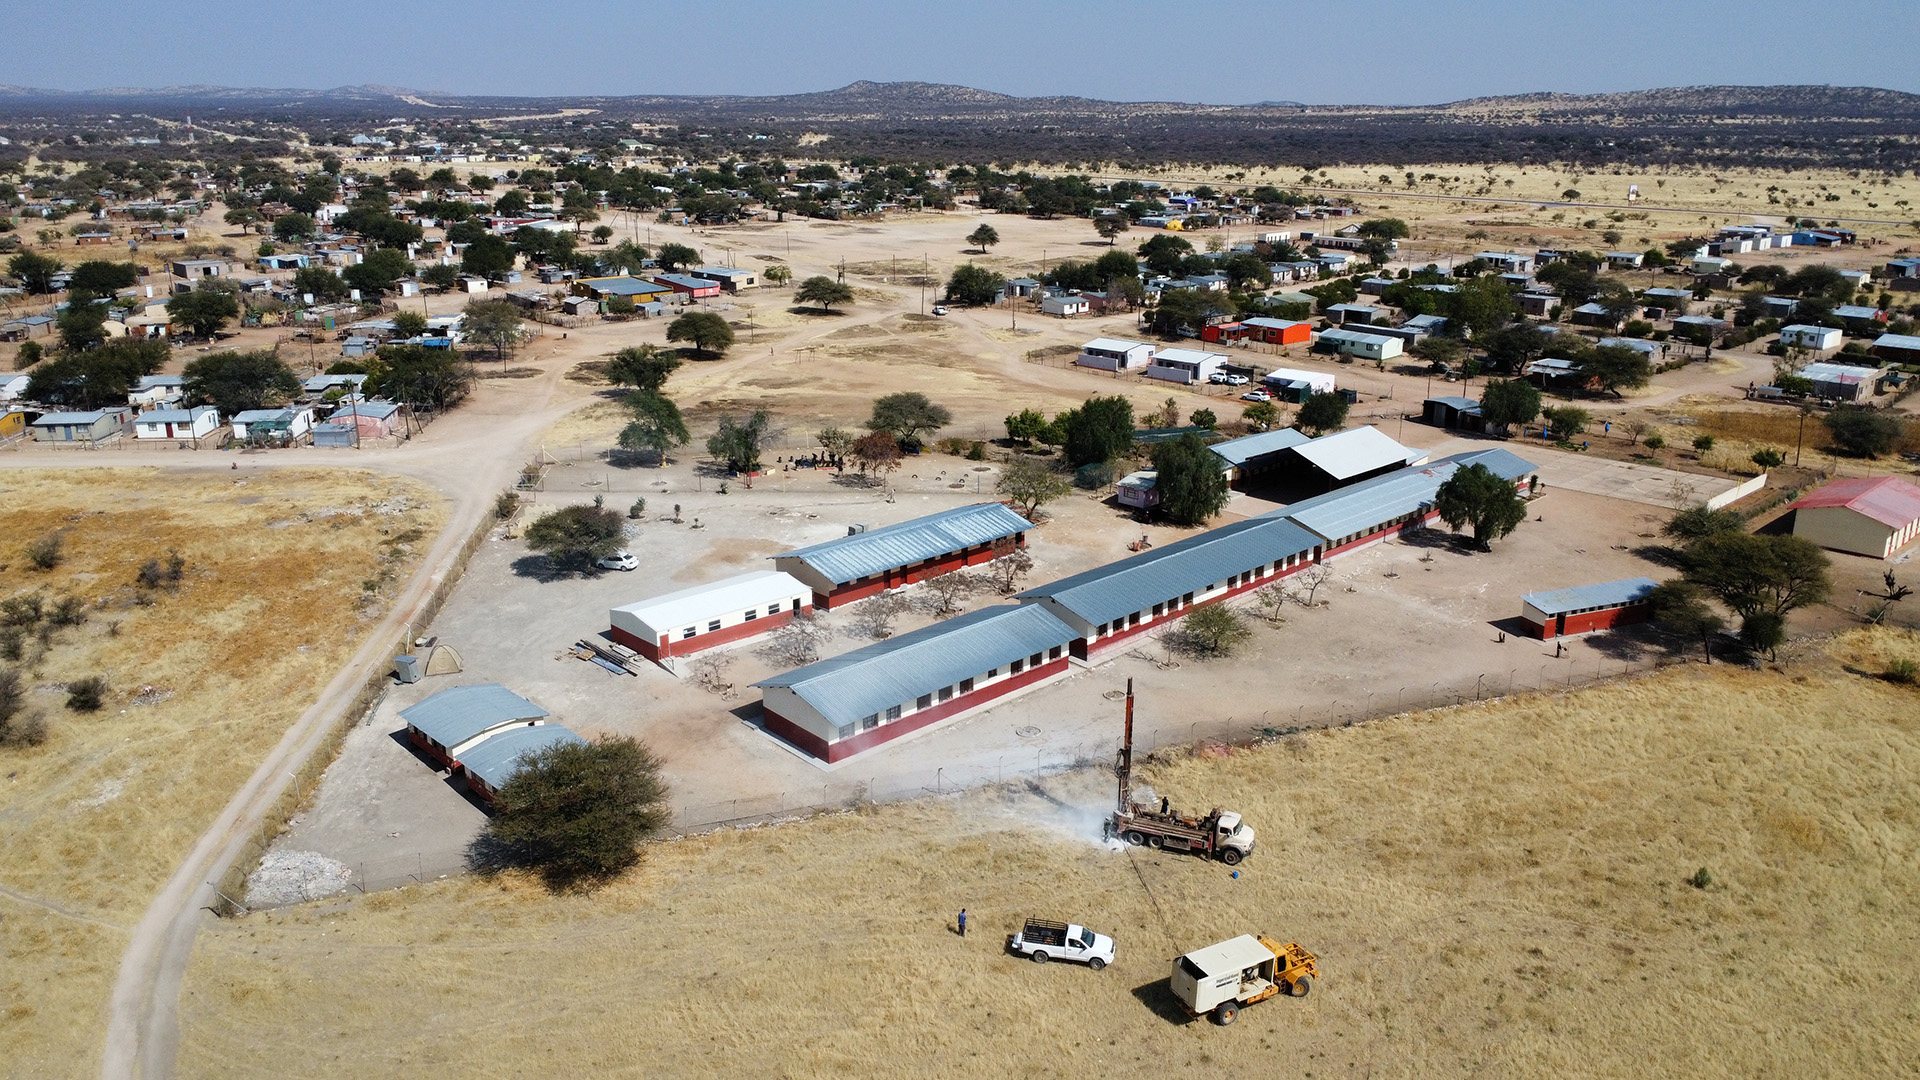 The Primary School Kalkfeld 2022 from above, with assembly hall and new classrooms